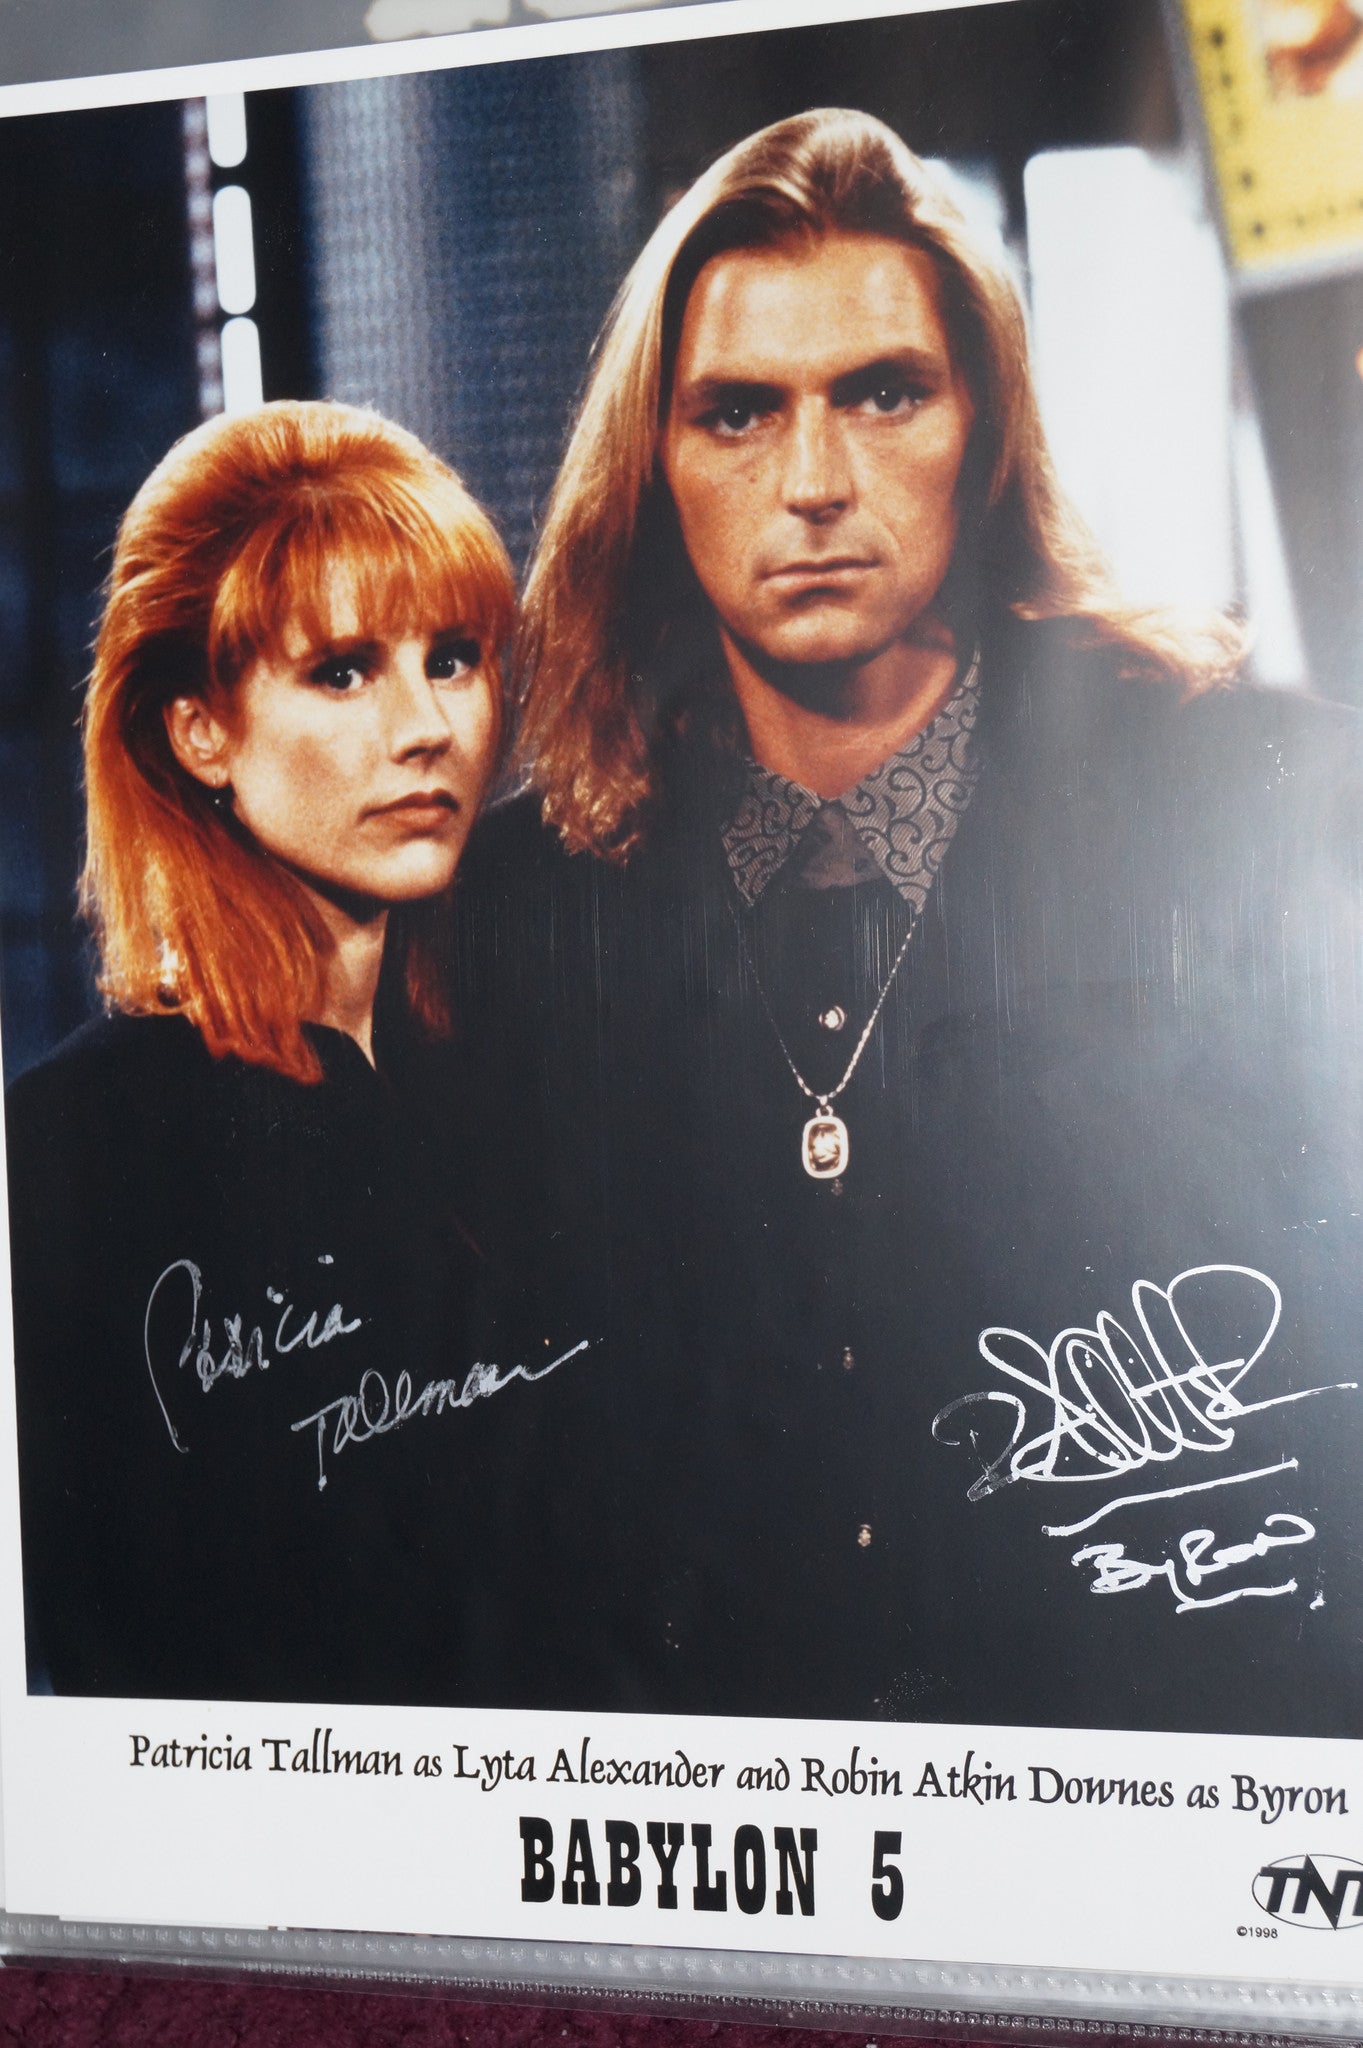 Autographed Photo "Lyta Alexander and Robin Atkin Downes"